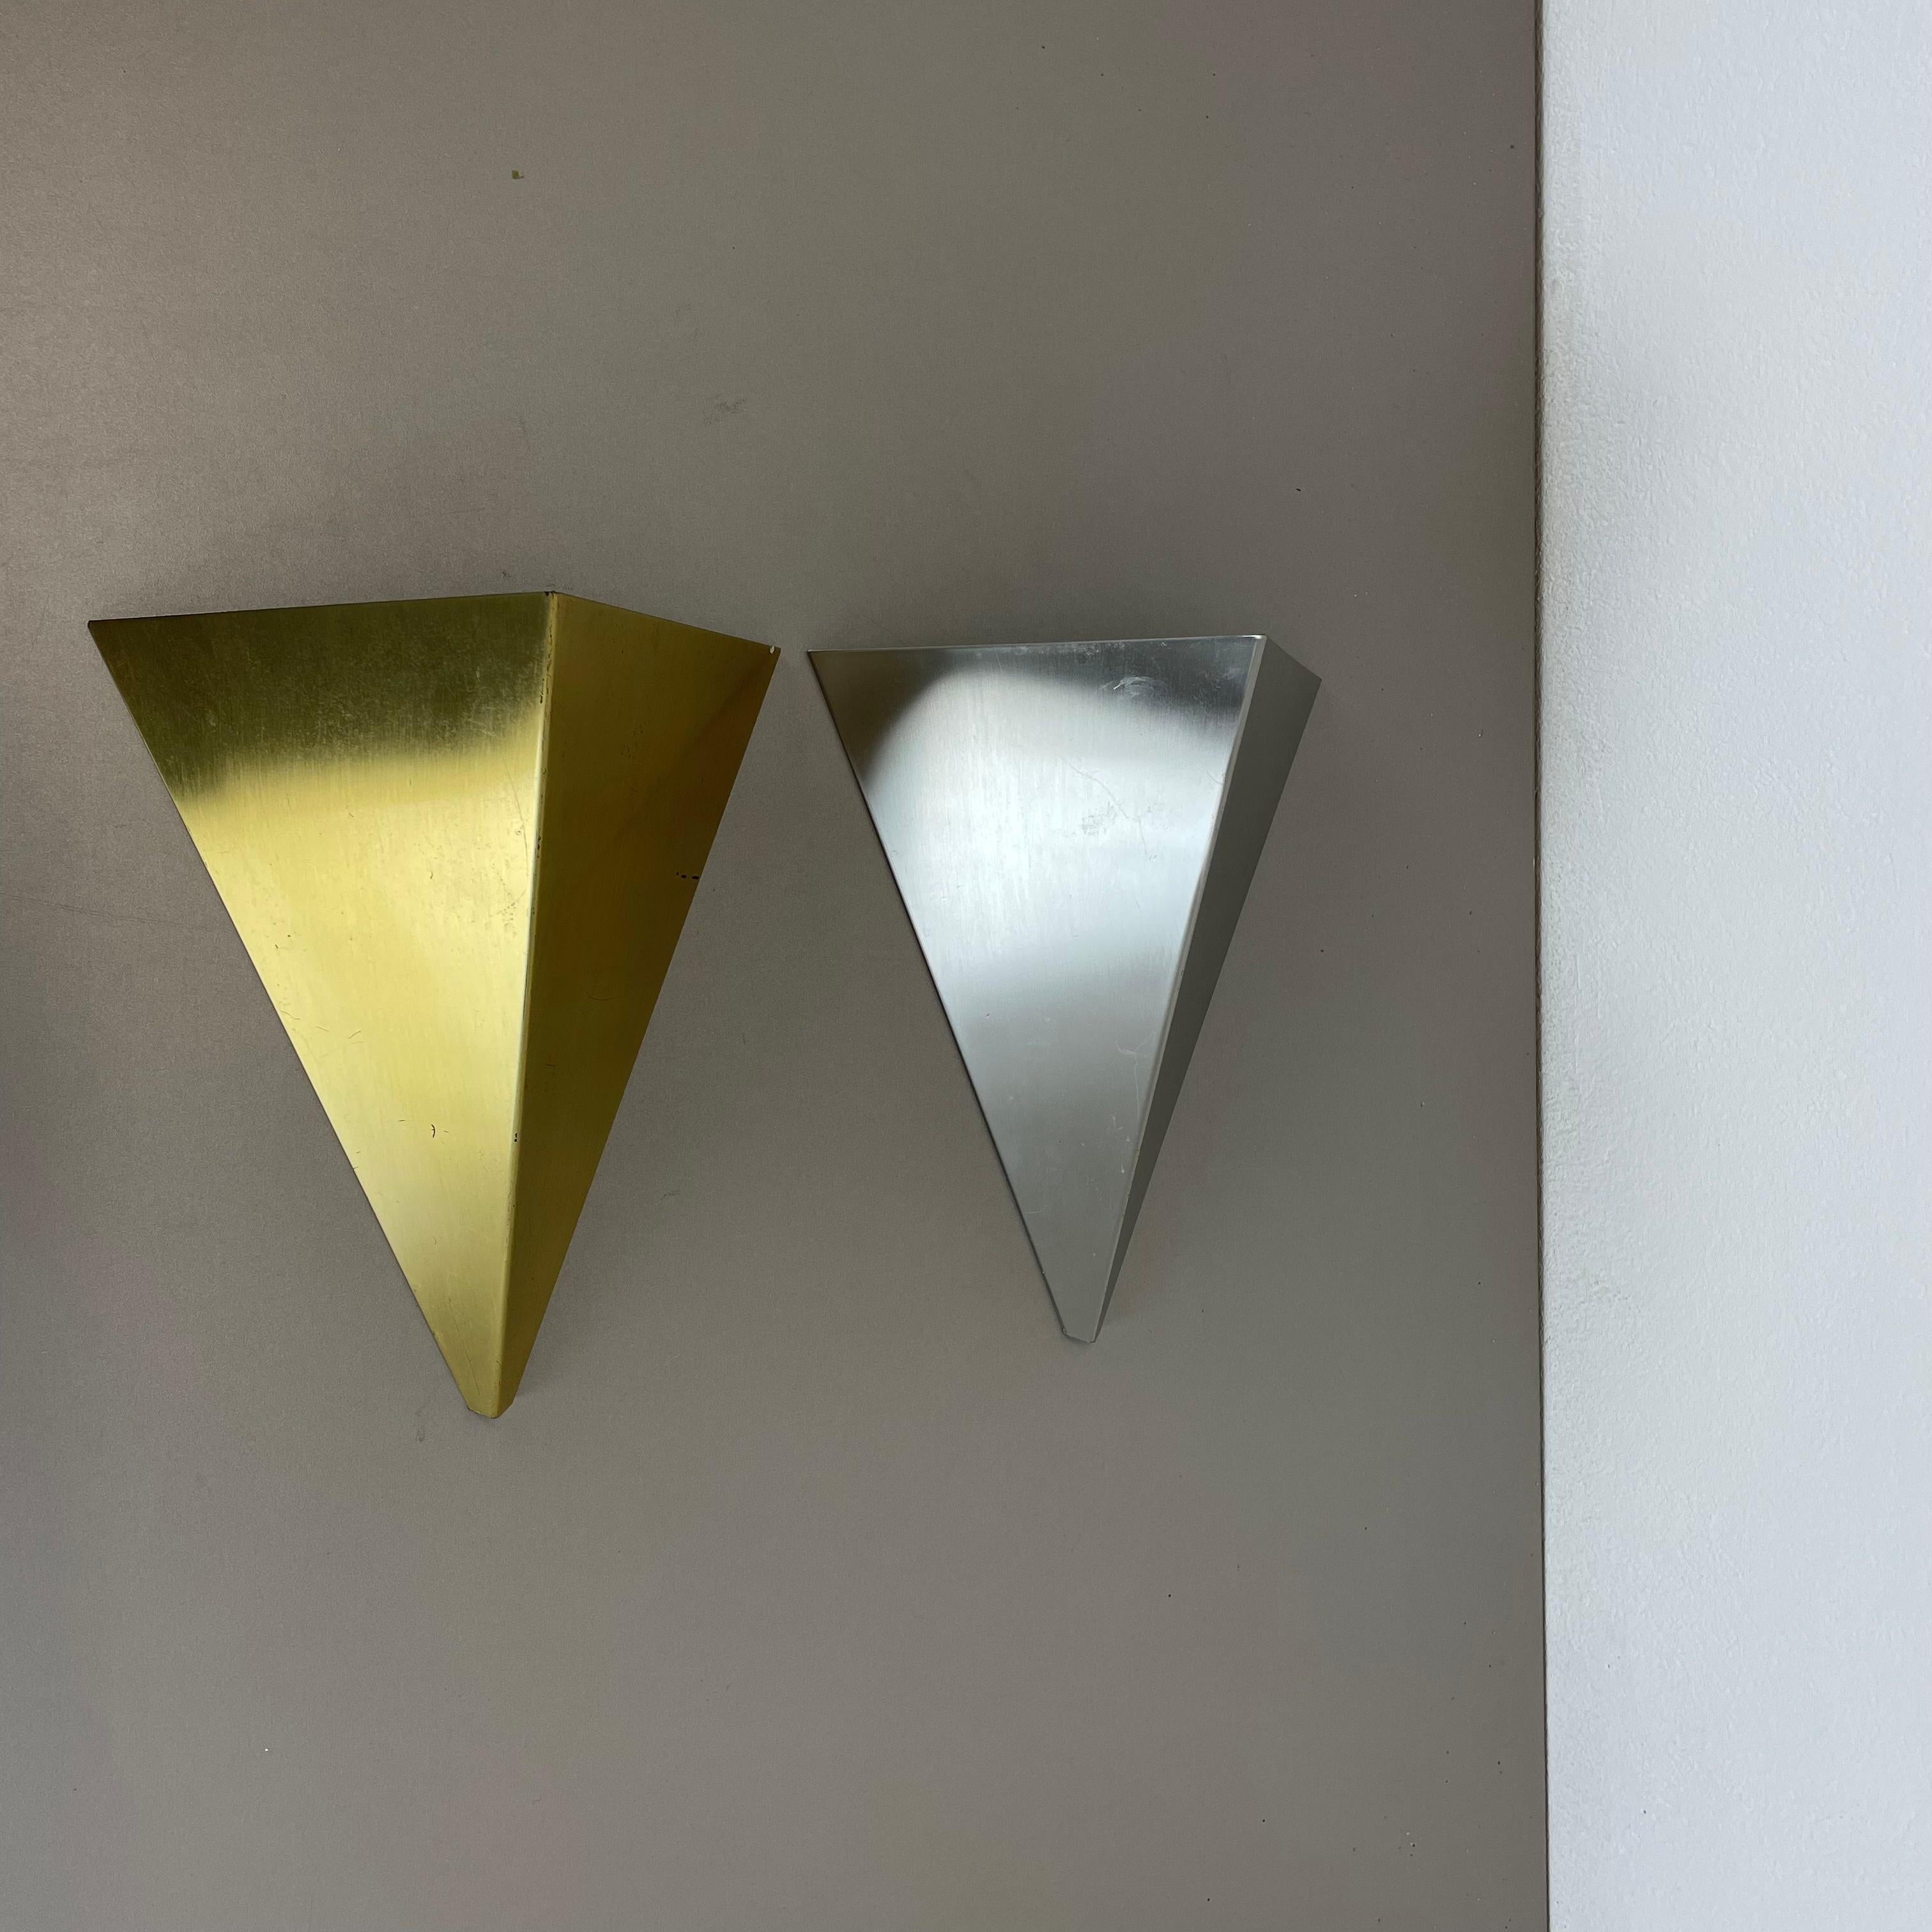 Article:

wall light set of 2

In brass and silver tone



Producer: Bankamp Leuchten, Germany



Origin: Germany in the manner of Stilnovo and Sciolari



Age:

1980s



This modernist light set was produced in Germany in the 1980s by Bankamp